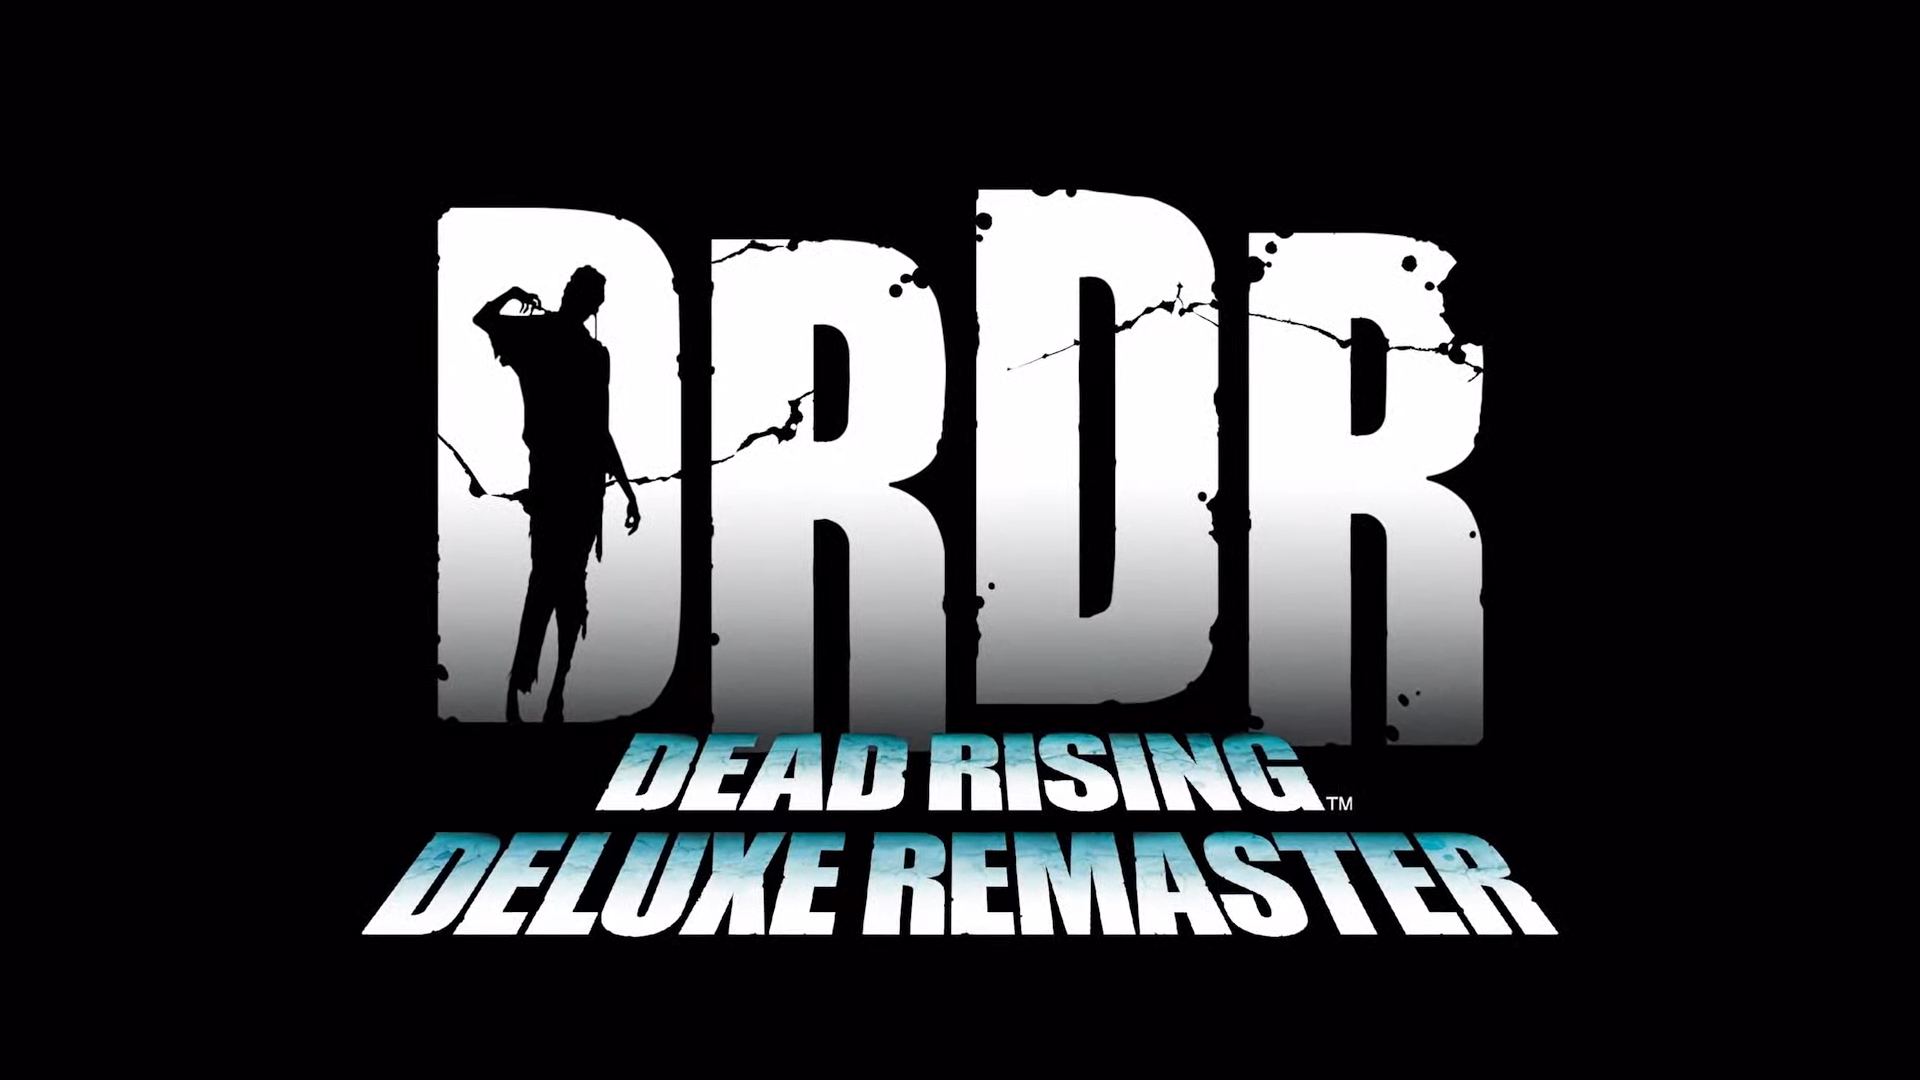 Controversial Feature Included in Dead Rising Deluxe Remaster on PC